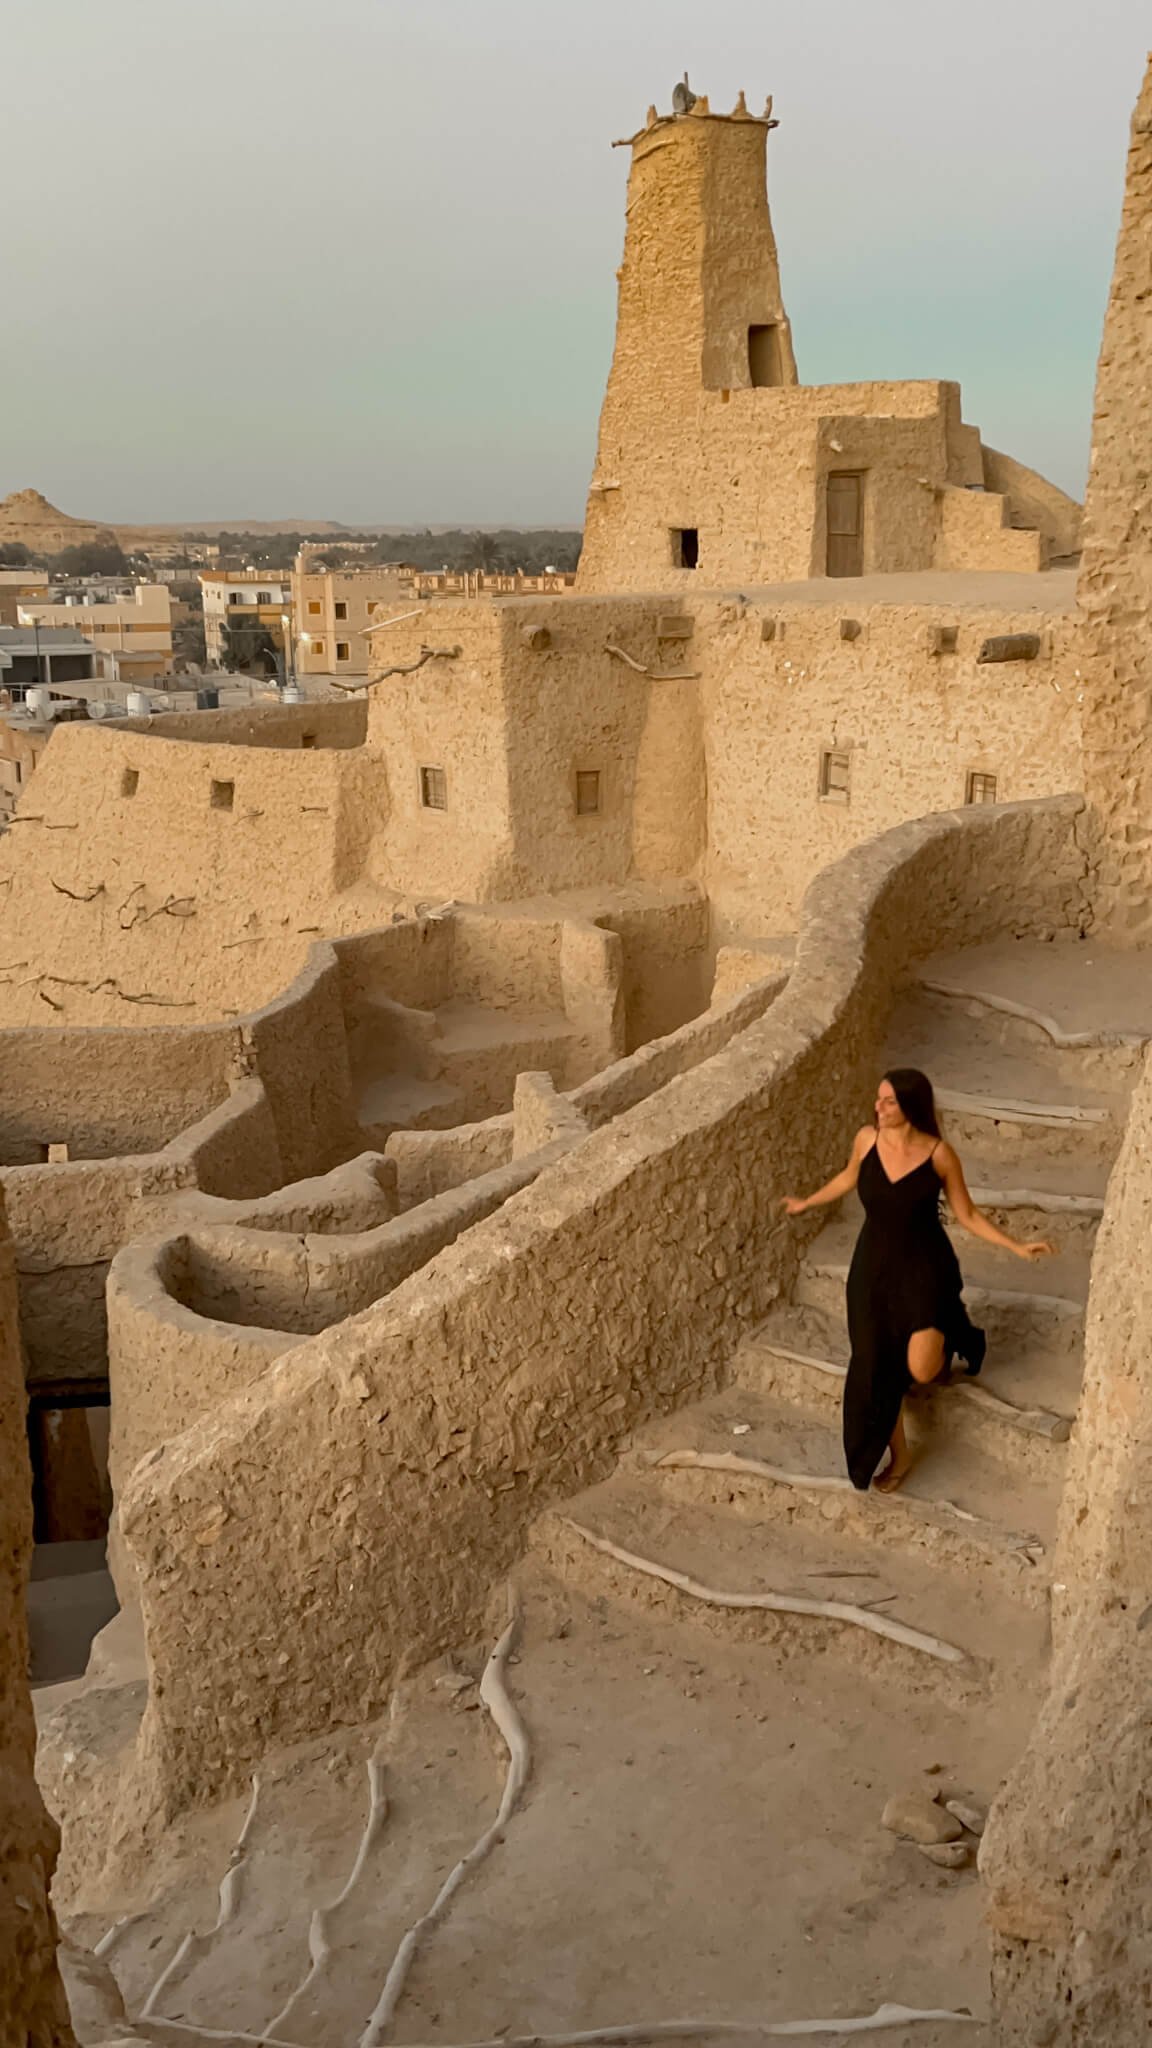 Shali fortress, things to do in Siwa Oasis in Egypt